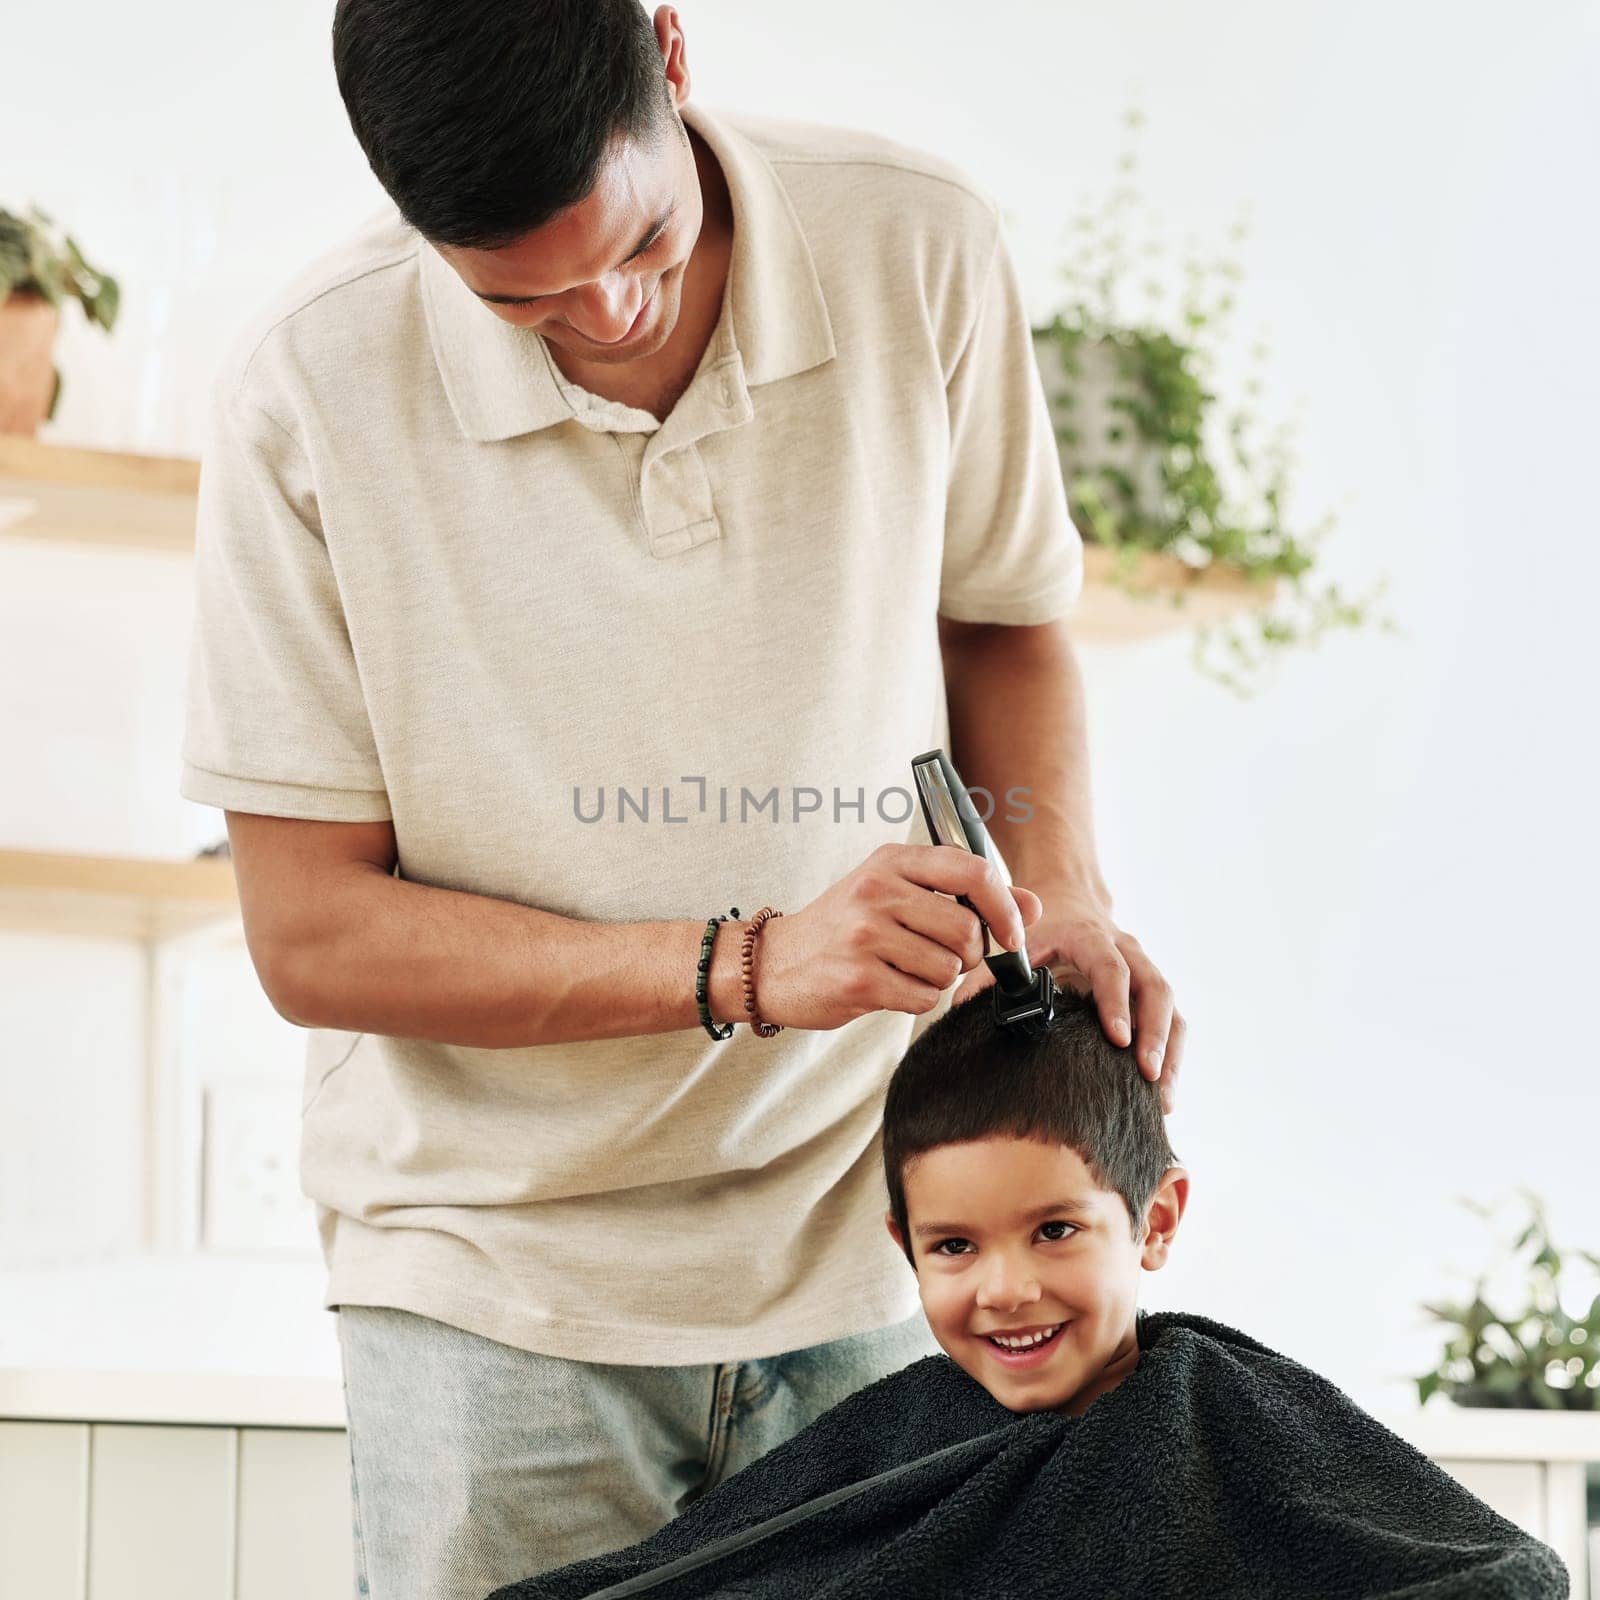 Family, children and haircut with a father shaving the hair of his son together in the home for grooming. Kids, barber and hairstyle with a man cutting the head of his son as a hairdresser in a house by YuriArcurs